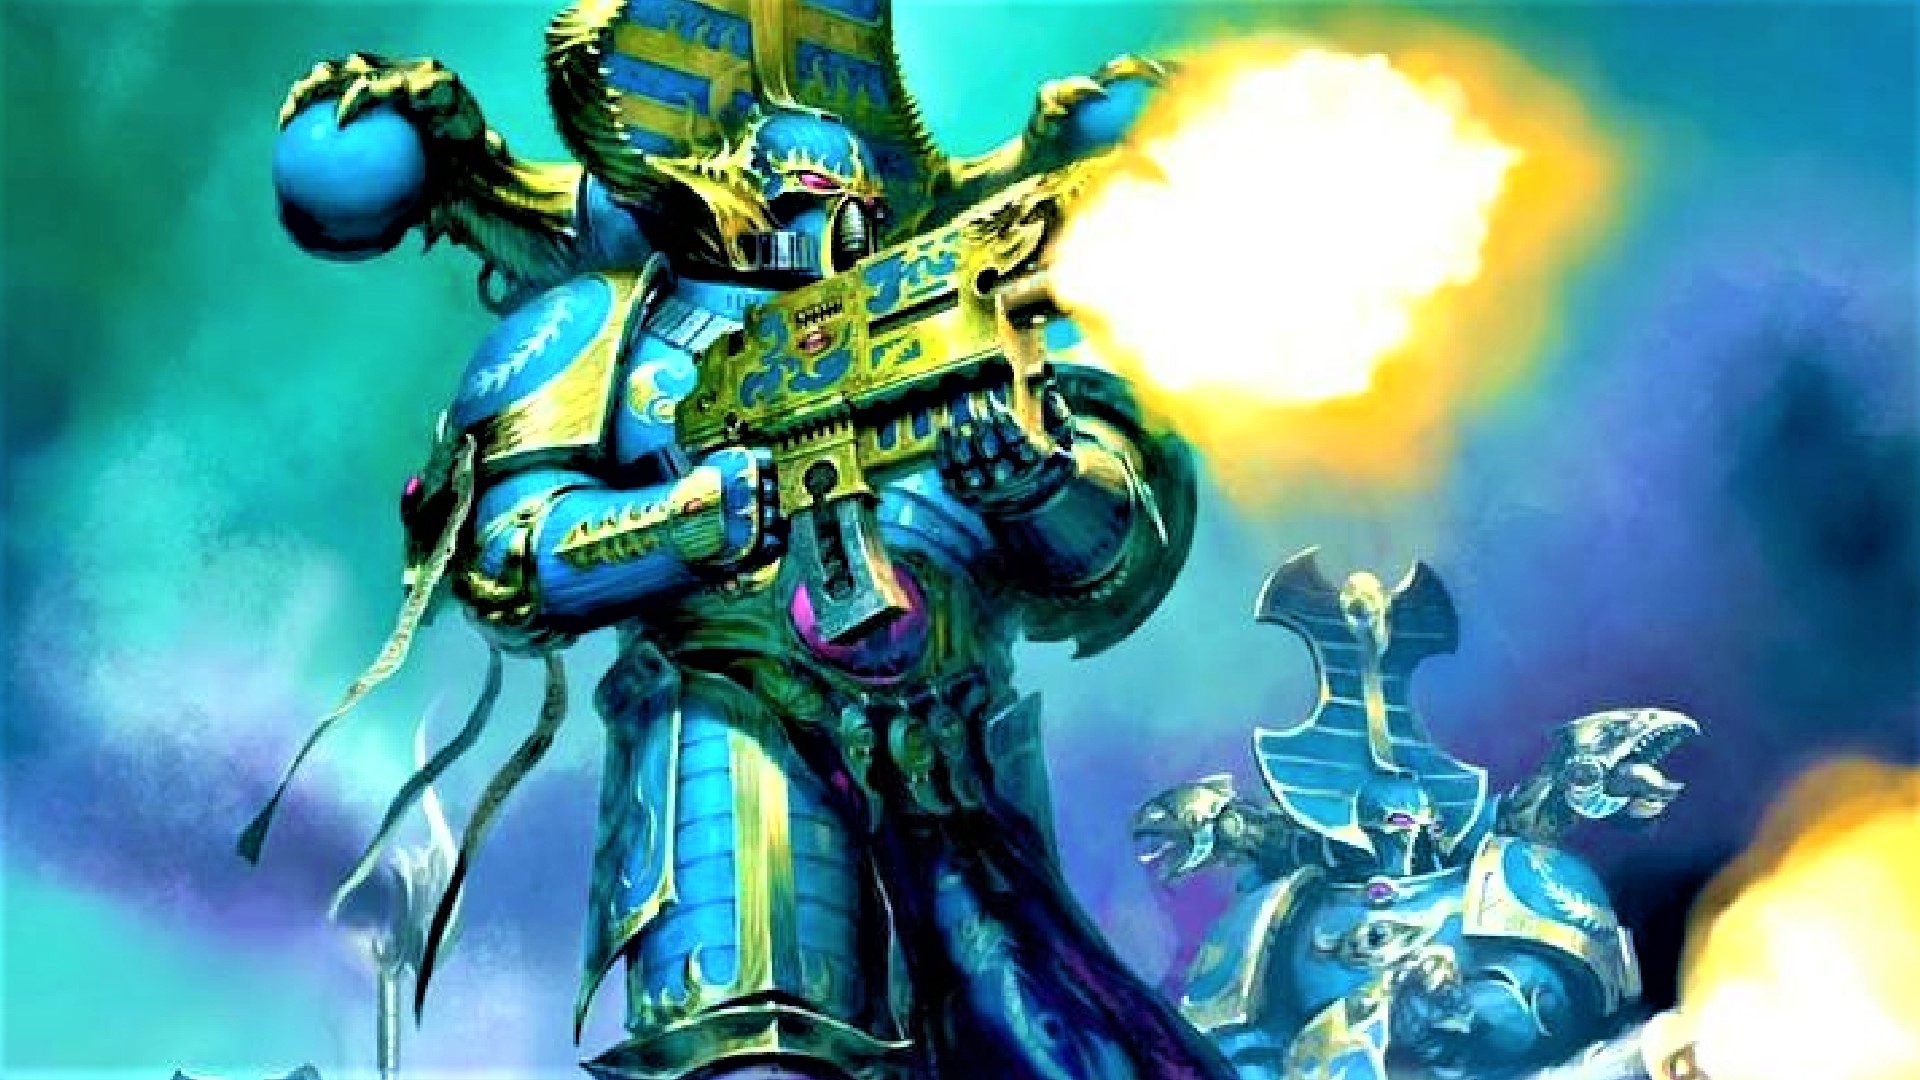 Warhammer 40,000: 10 Best Units For The Thousand Sons